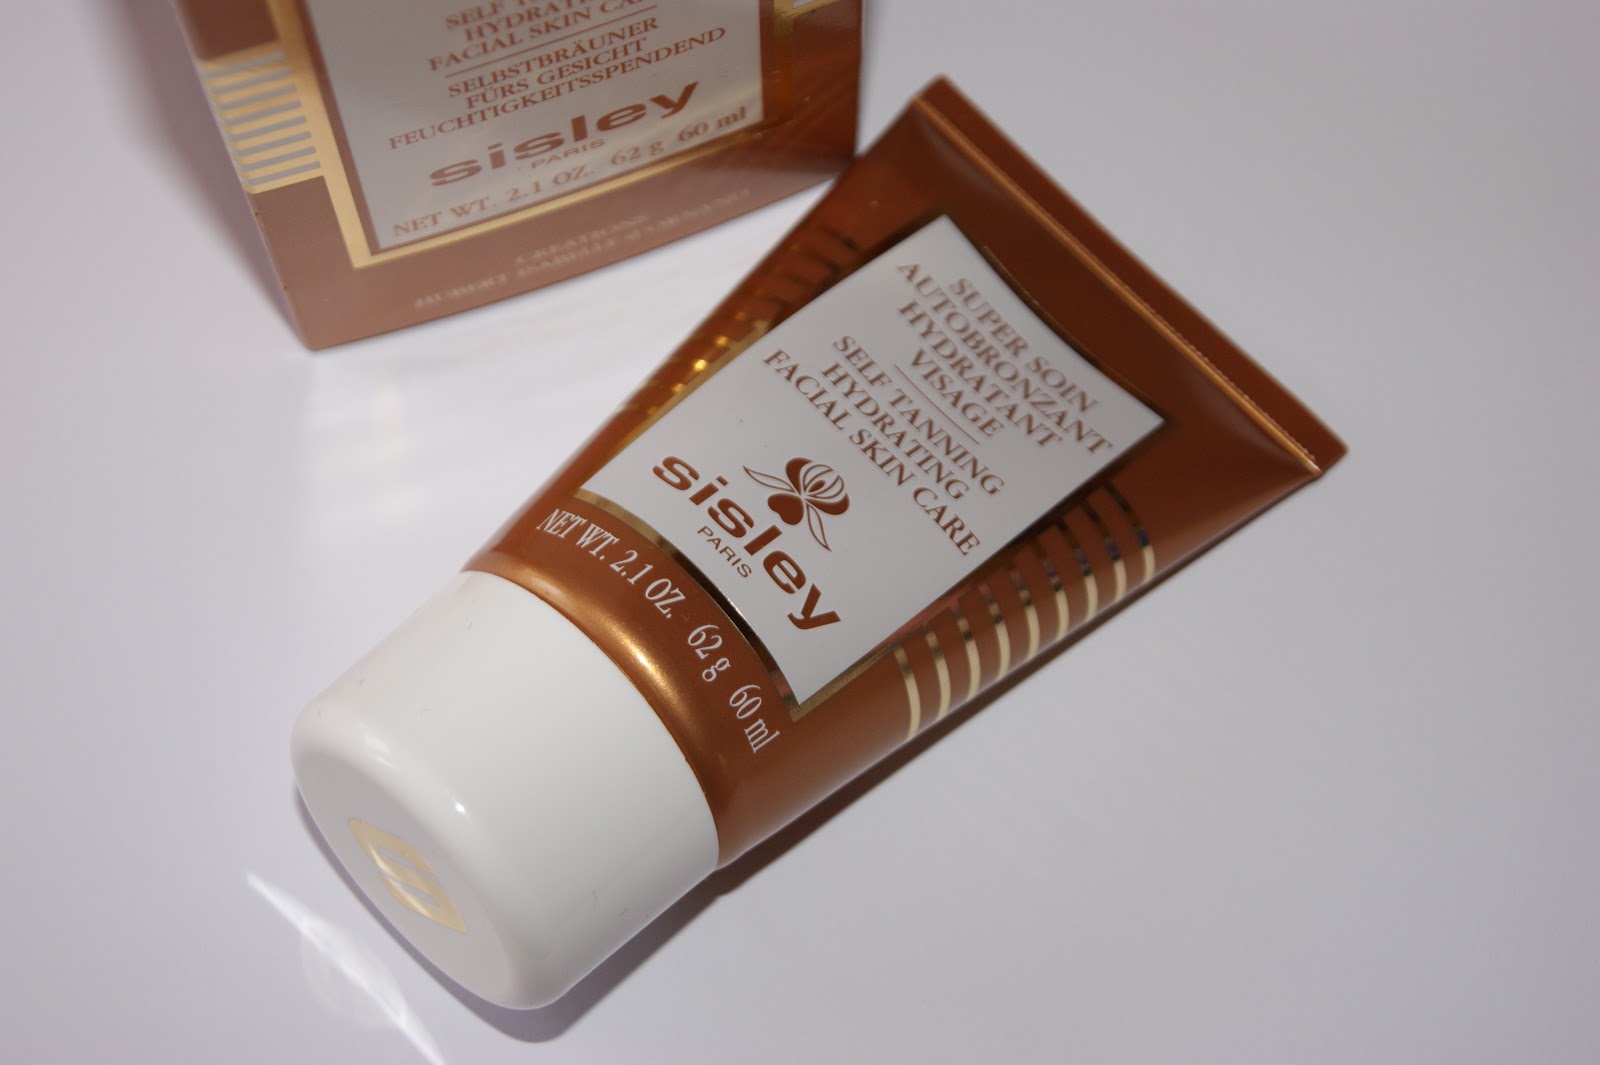 Sisley Self Tanning Hydrating Facial Skin Care - Review | The Sunday Girl